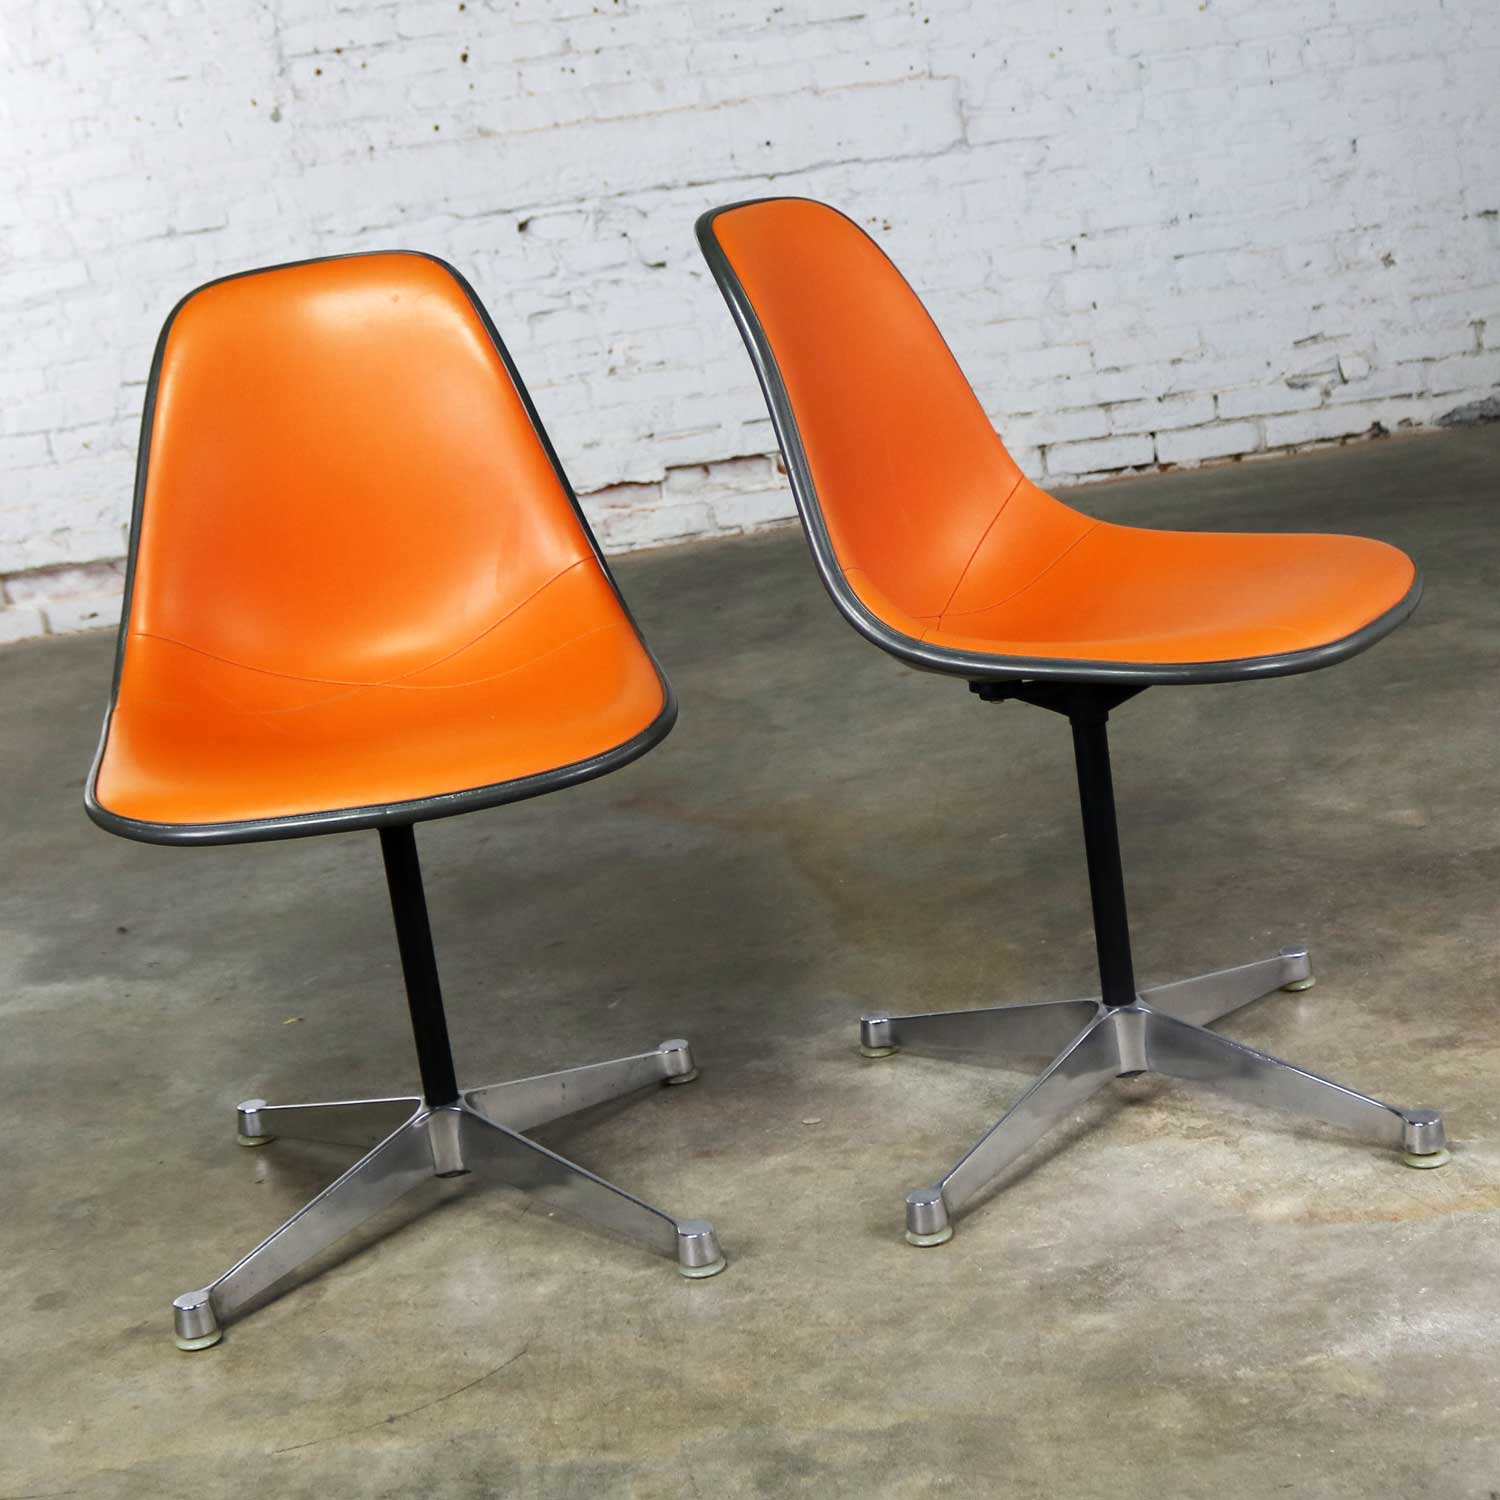 Eames PSC Orange Vinyl Upholstered Pivoting Side Shell Chair on Contract Base a Pair